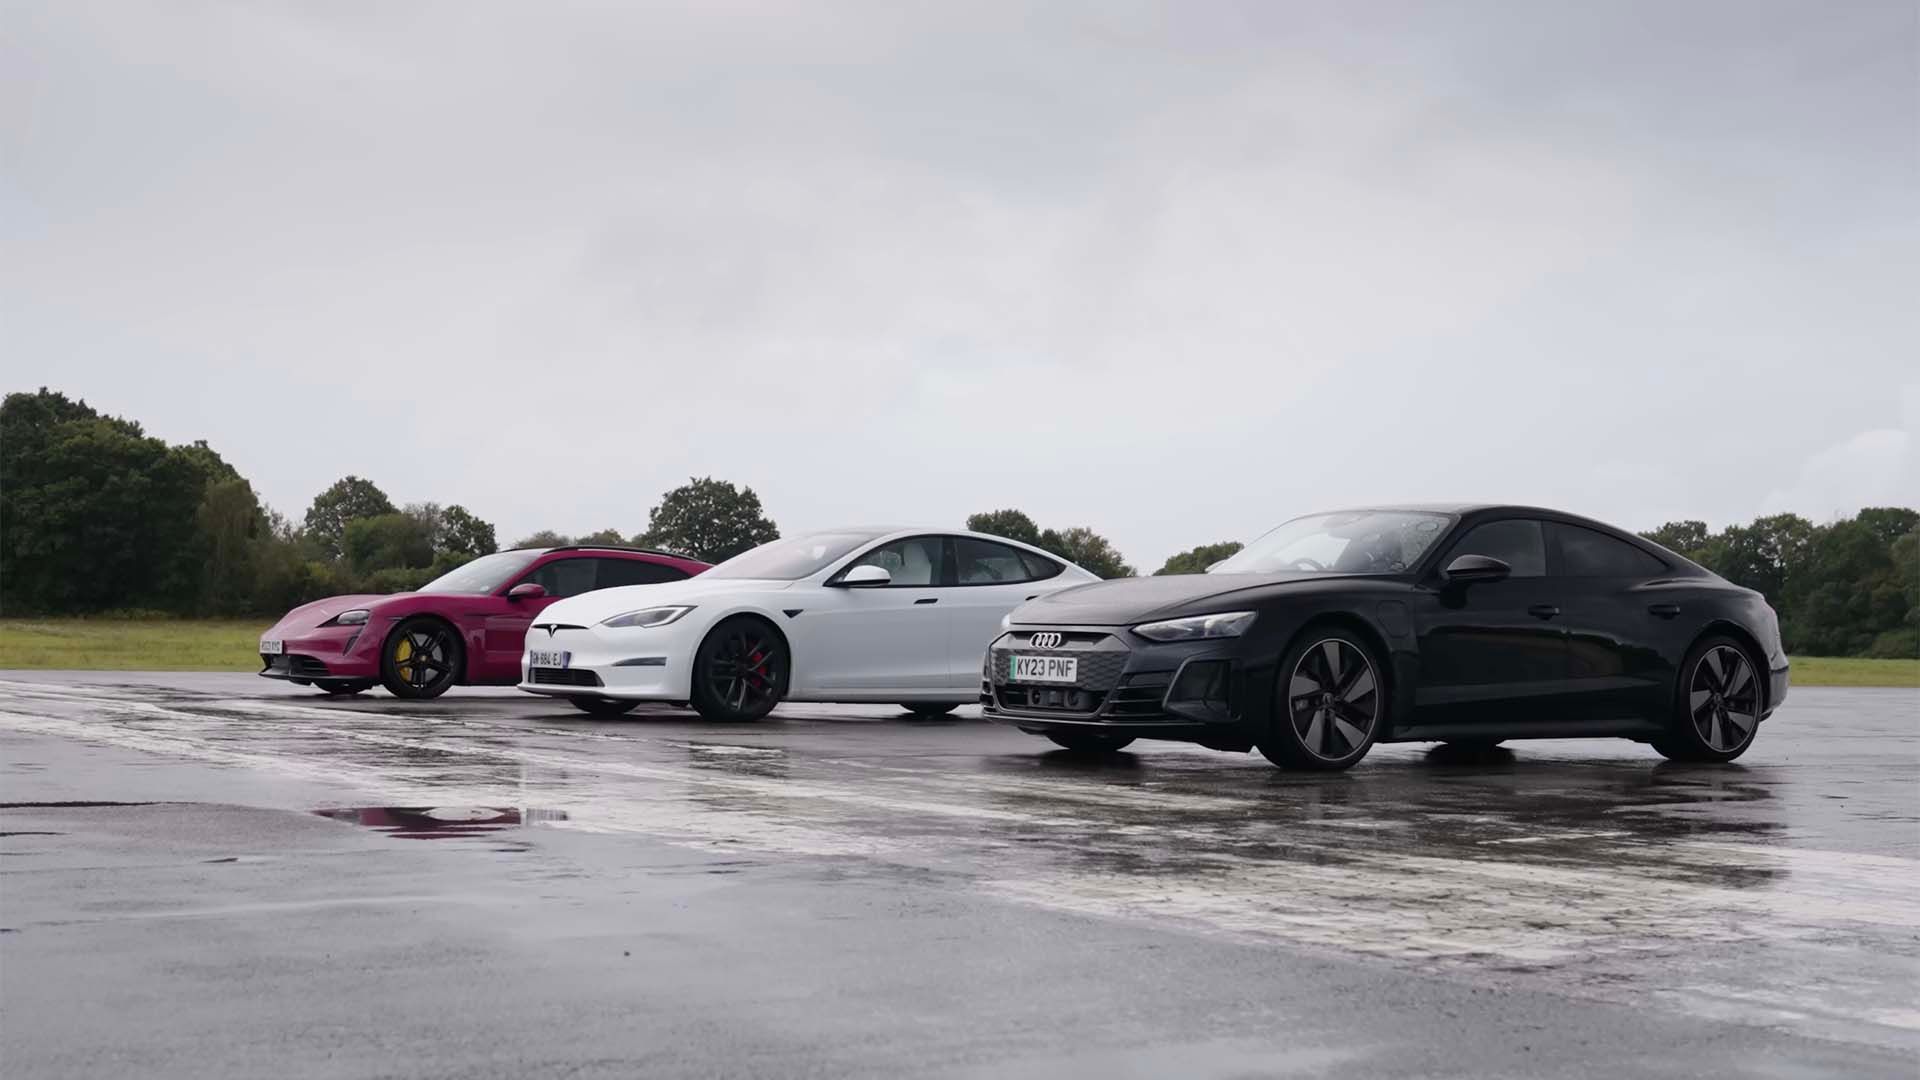 Tesla Model S Plaid with Track Package challenging a Porsche Taycan Turbo S and Audi RS e-tron GT